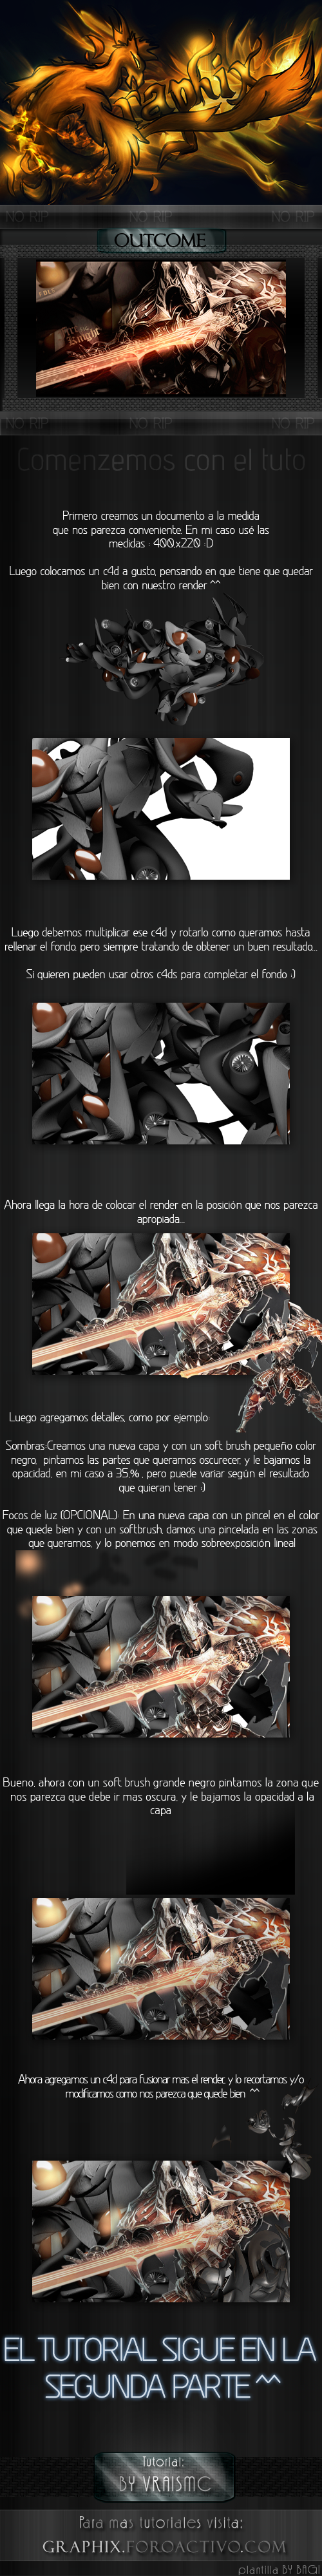 fire_knight_sig__tutorial_n_1_by_vraismc-d36gj0m.png